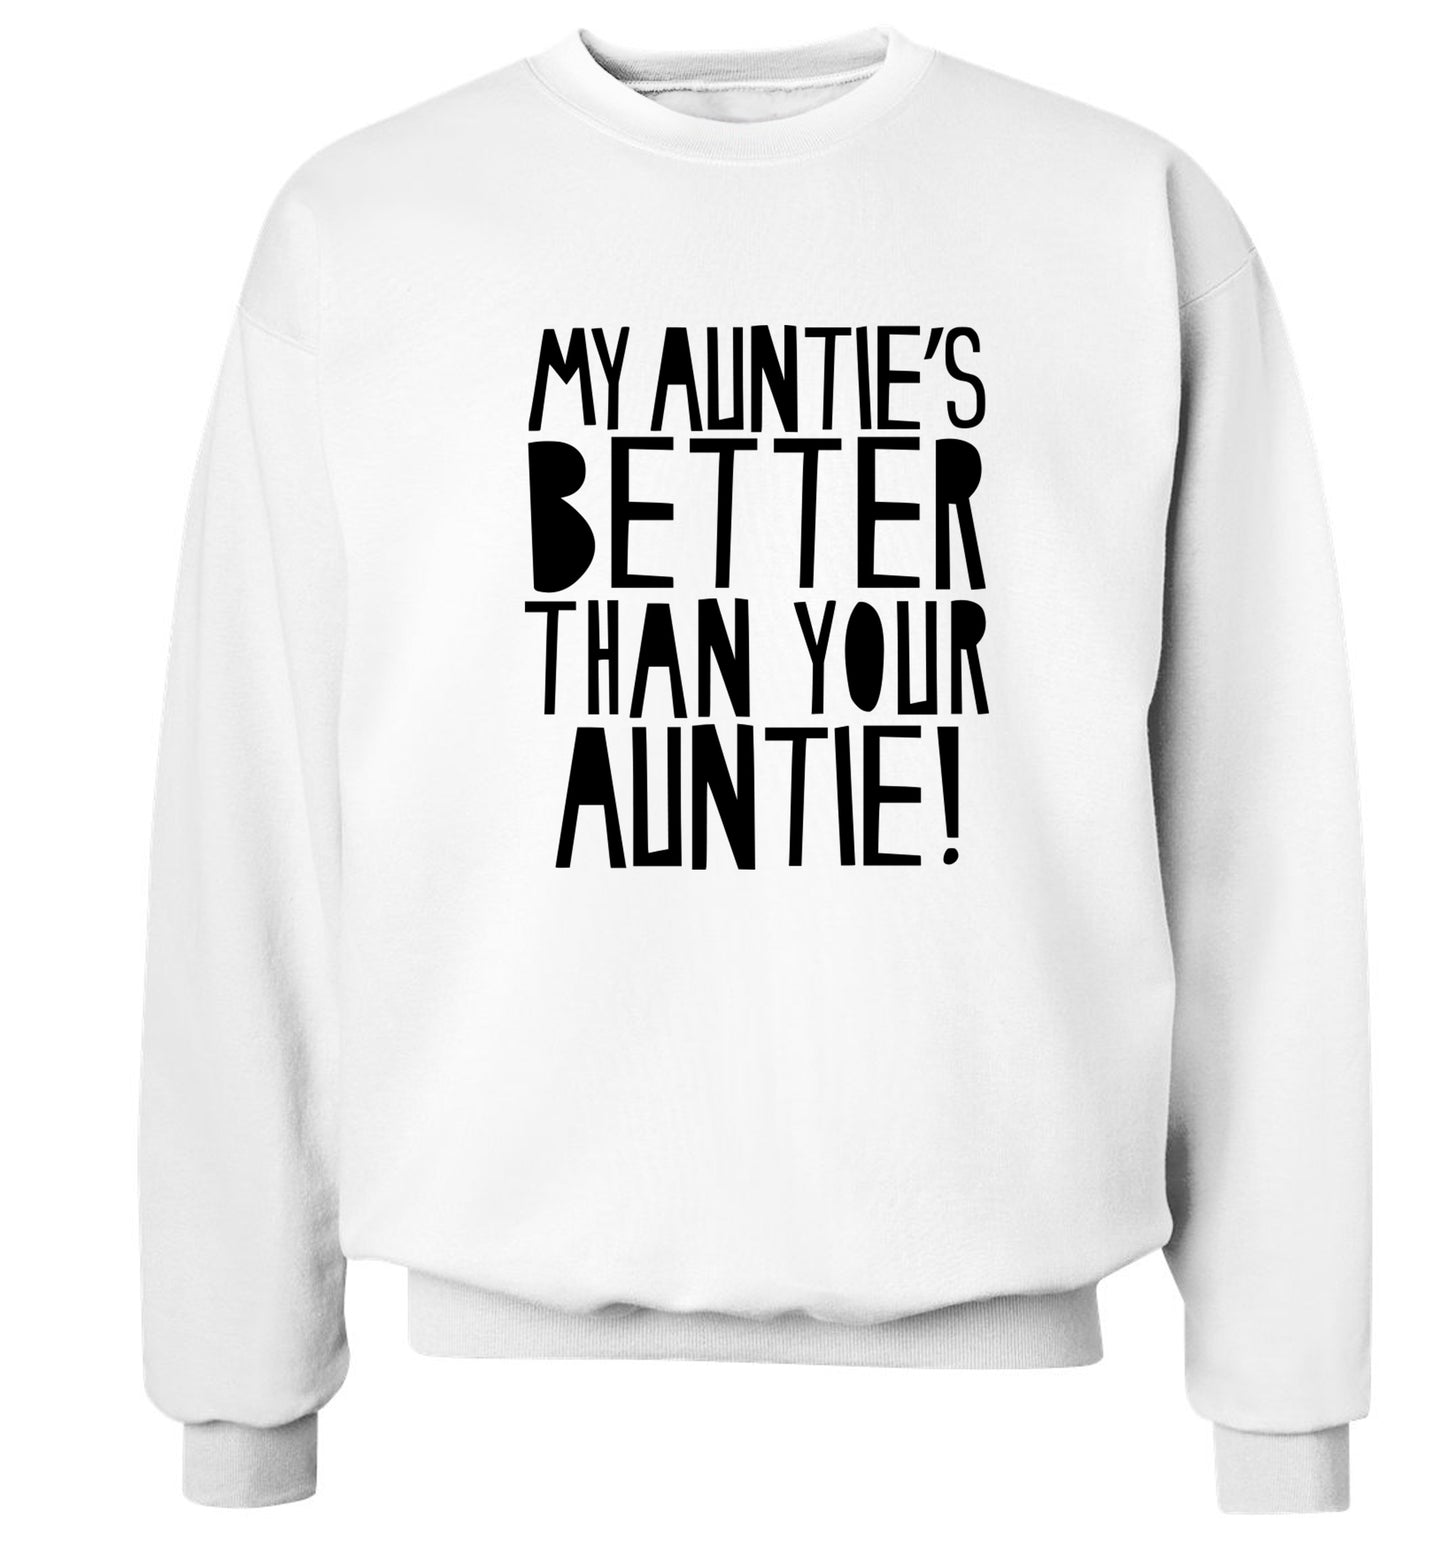 My auntie's better than your auntie Adult's unisex white Sweater 2XL